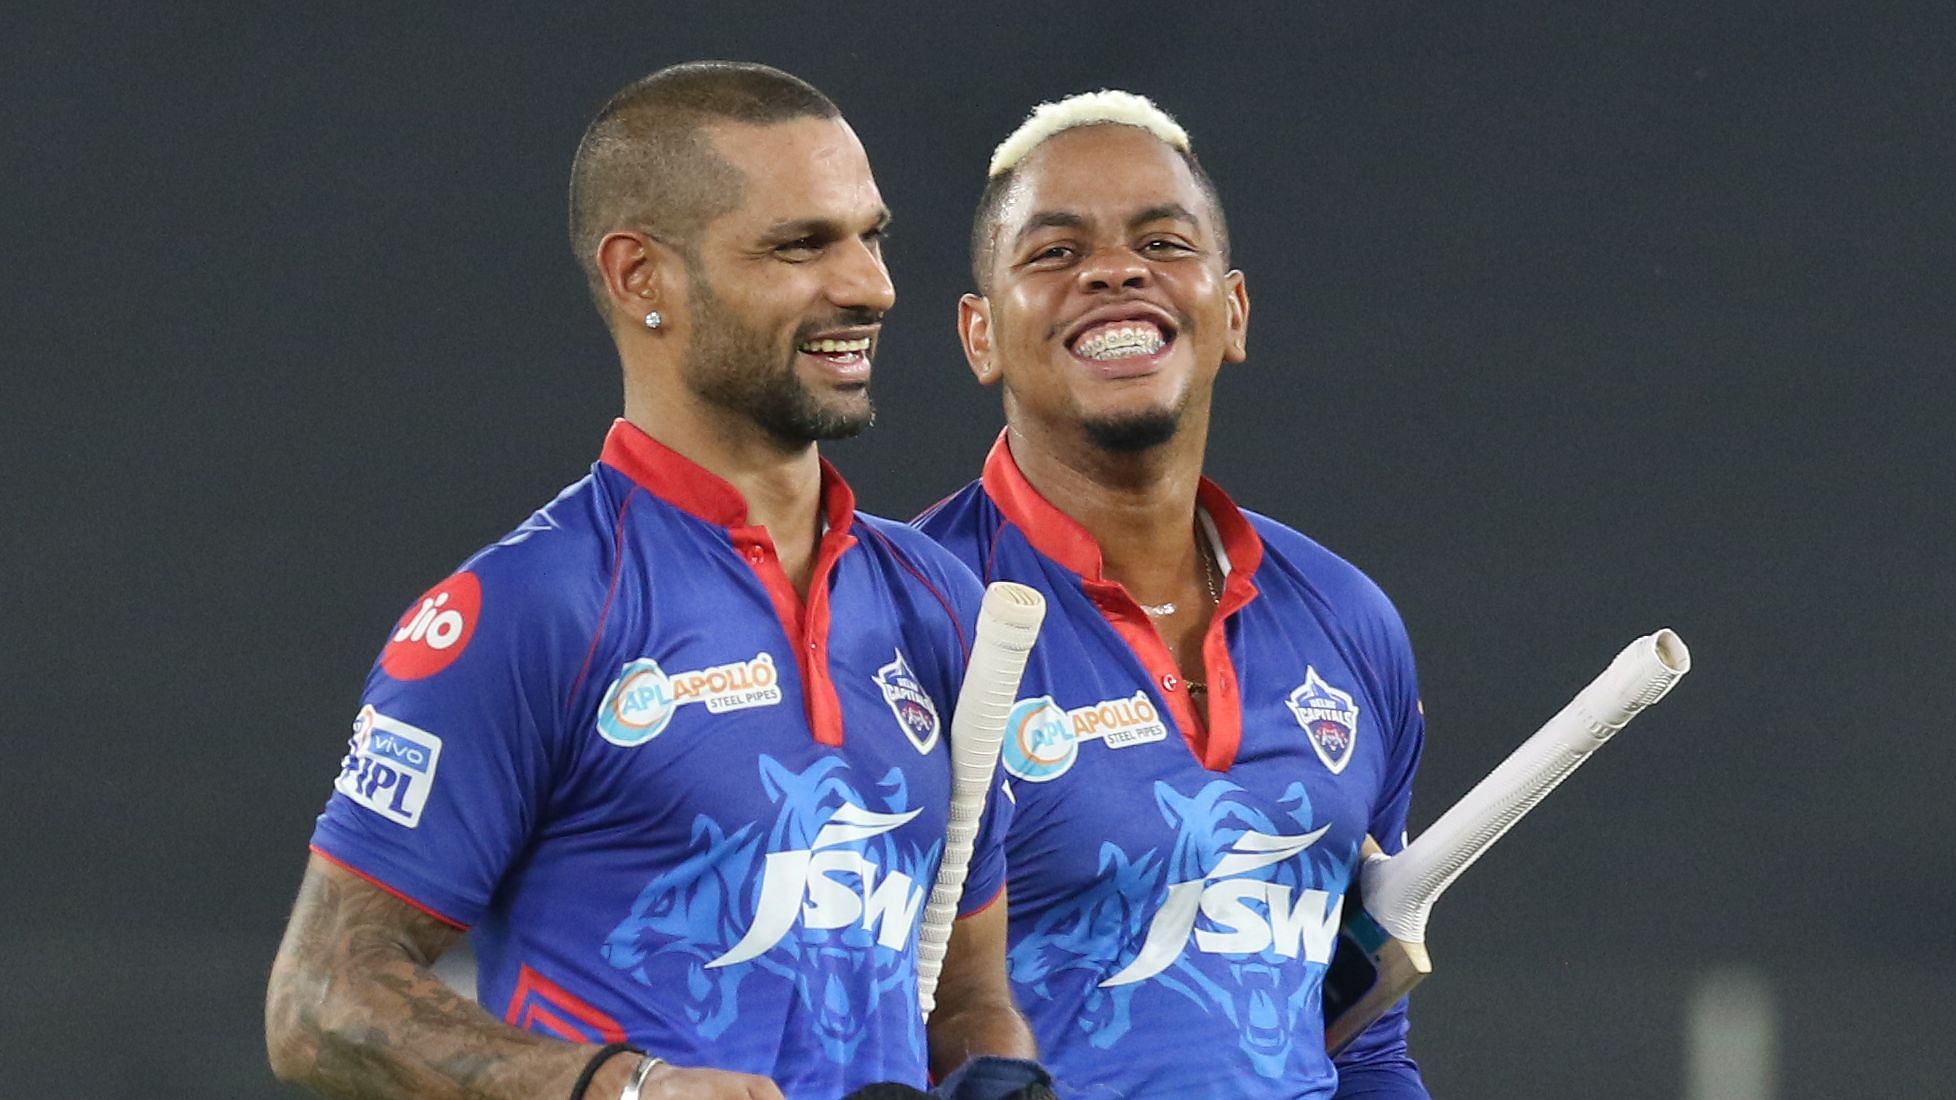 Shikhar Dhawan carried his bat to remain unbeaten on a 47-ball 69 to help Delhi Capitals beat Punjab Kings by 7 wickets.